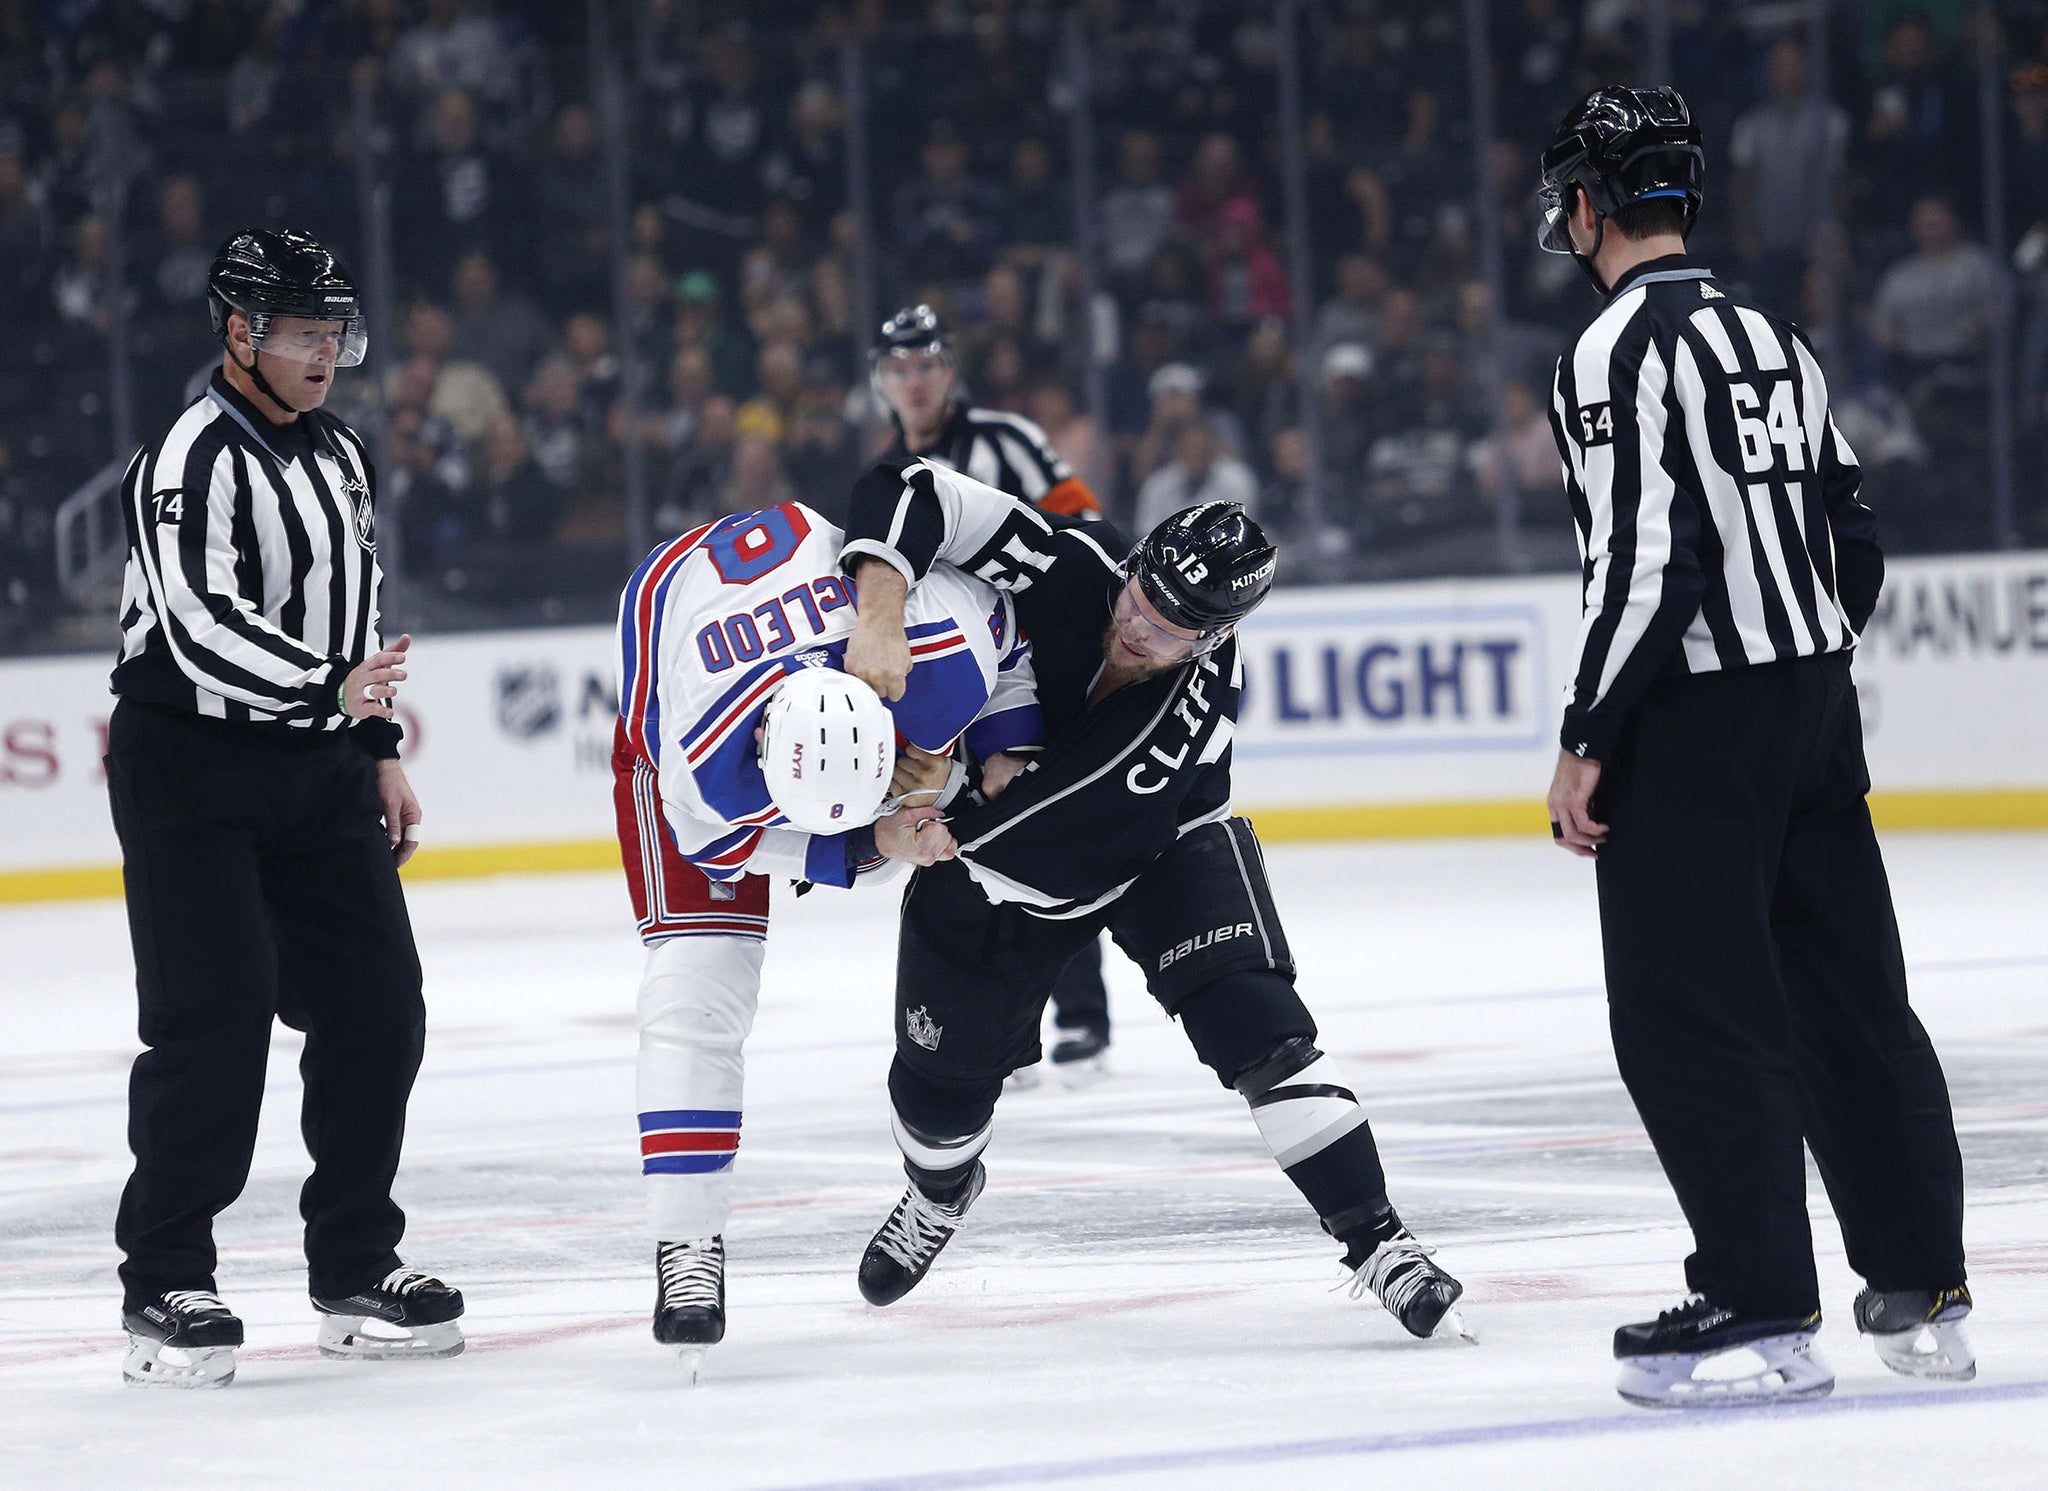 Kyle Clifford in a bout with Cody McCloud of the NY Rangers by Ringo Chiu